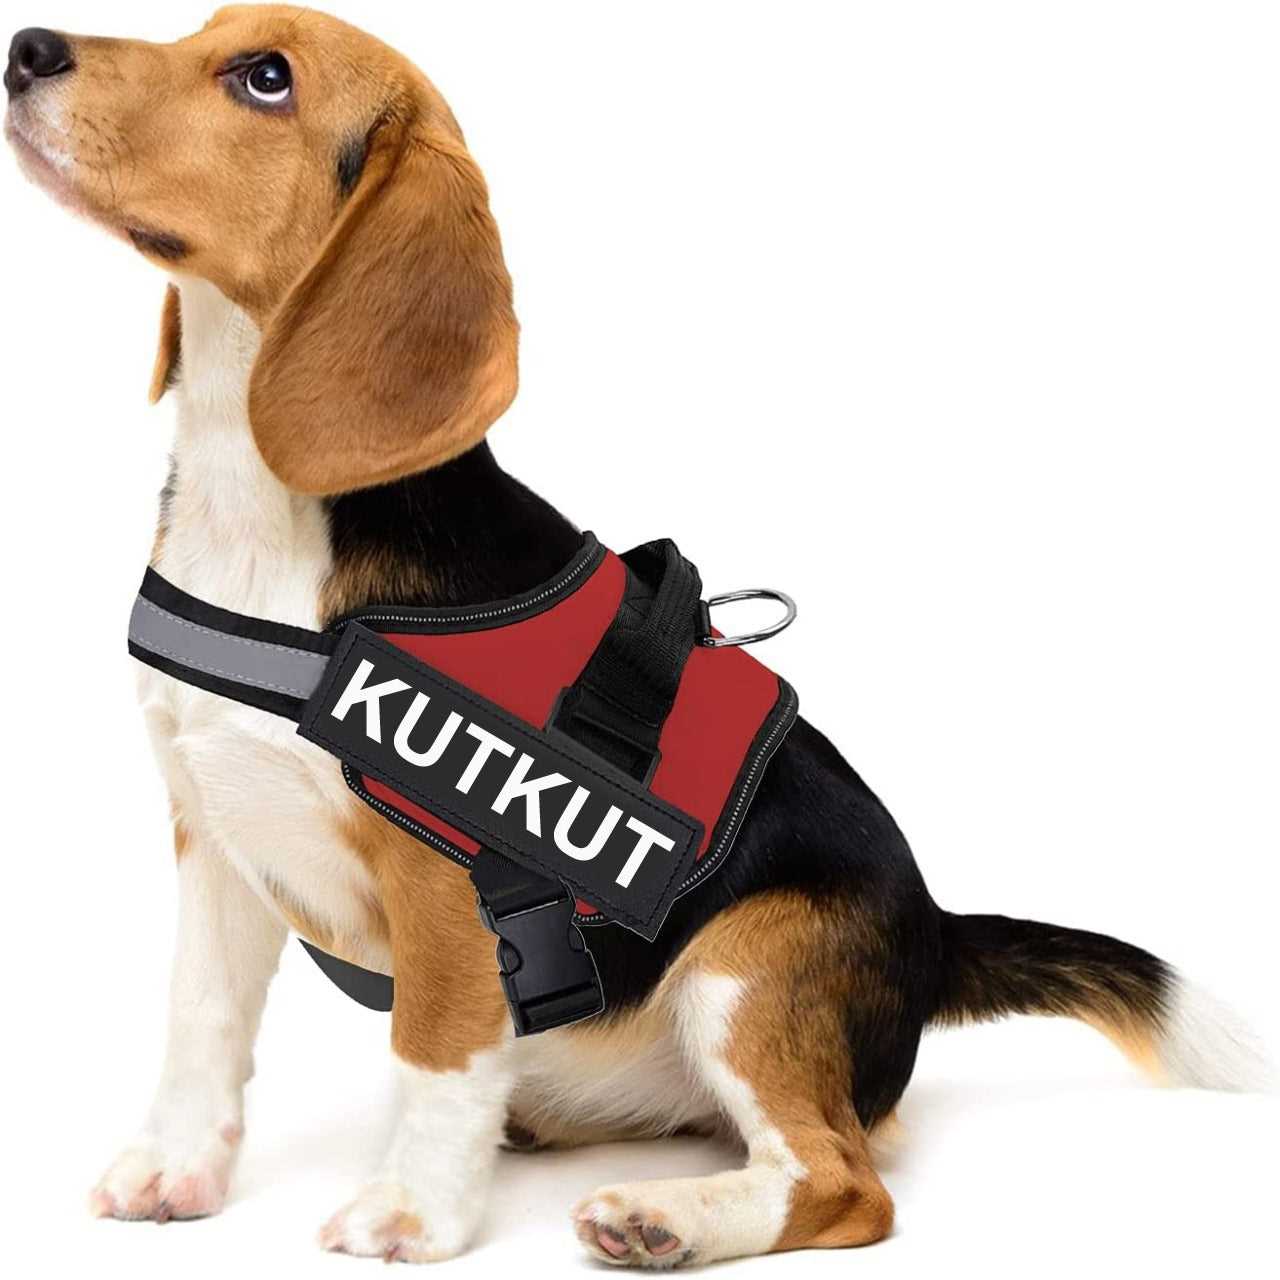 KUTKUT 2022 Dog Vest Harness, No-Pull Pet Harness Adjustable Soft Padded Dog Vest, Reflective No-Choke Pet Oxford Vest with Easy Control Handle for Small Dogs-Harness-kutkutstyle